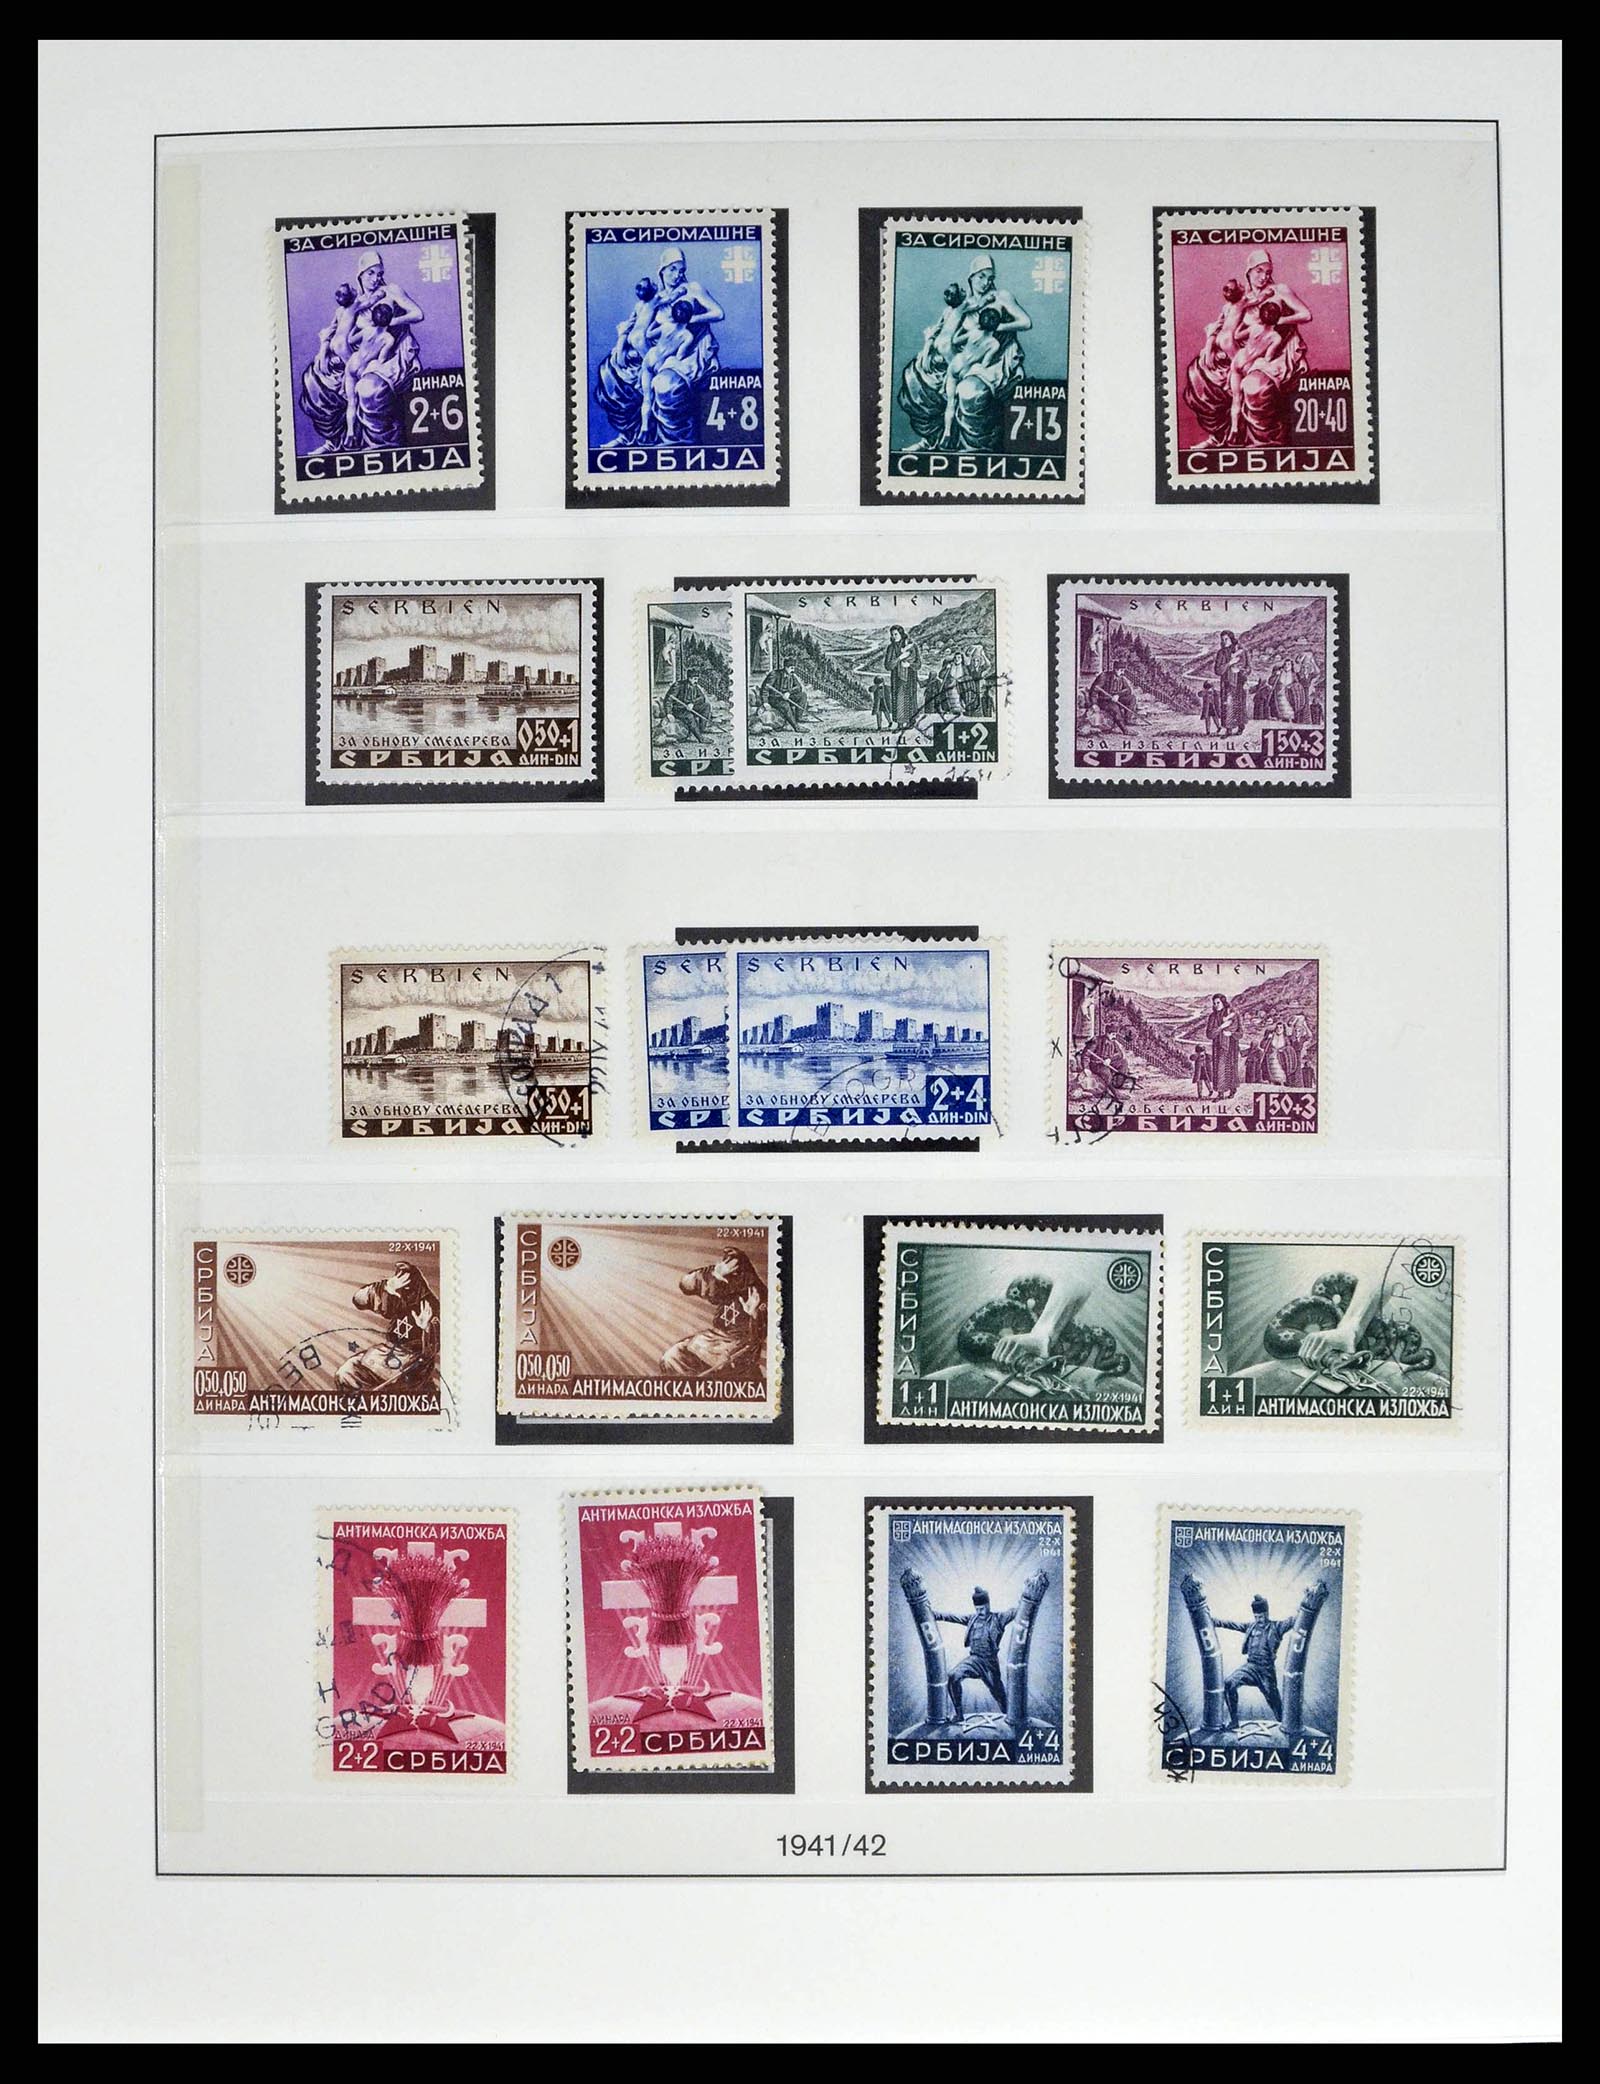 38505 0009 - Stamp collection 38505 German occupations 2nd world war 1939-1945.